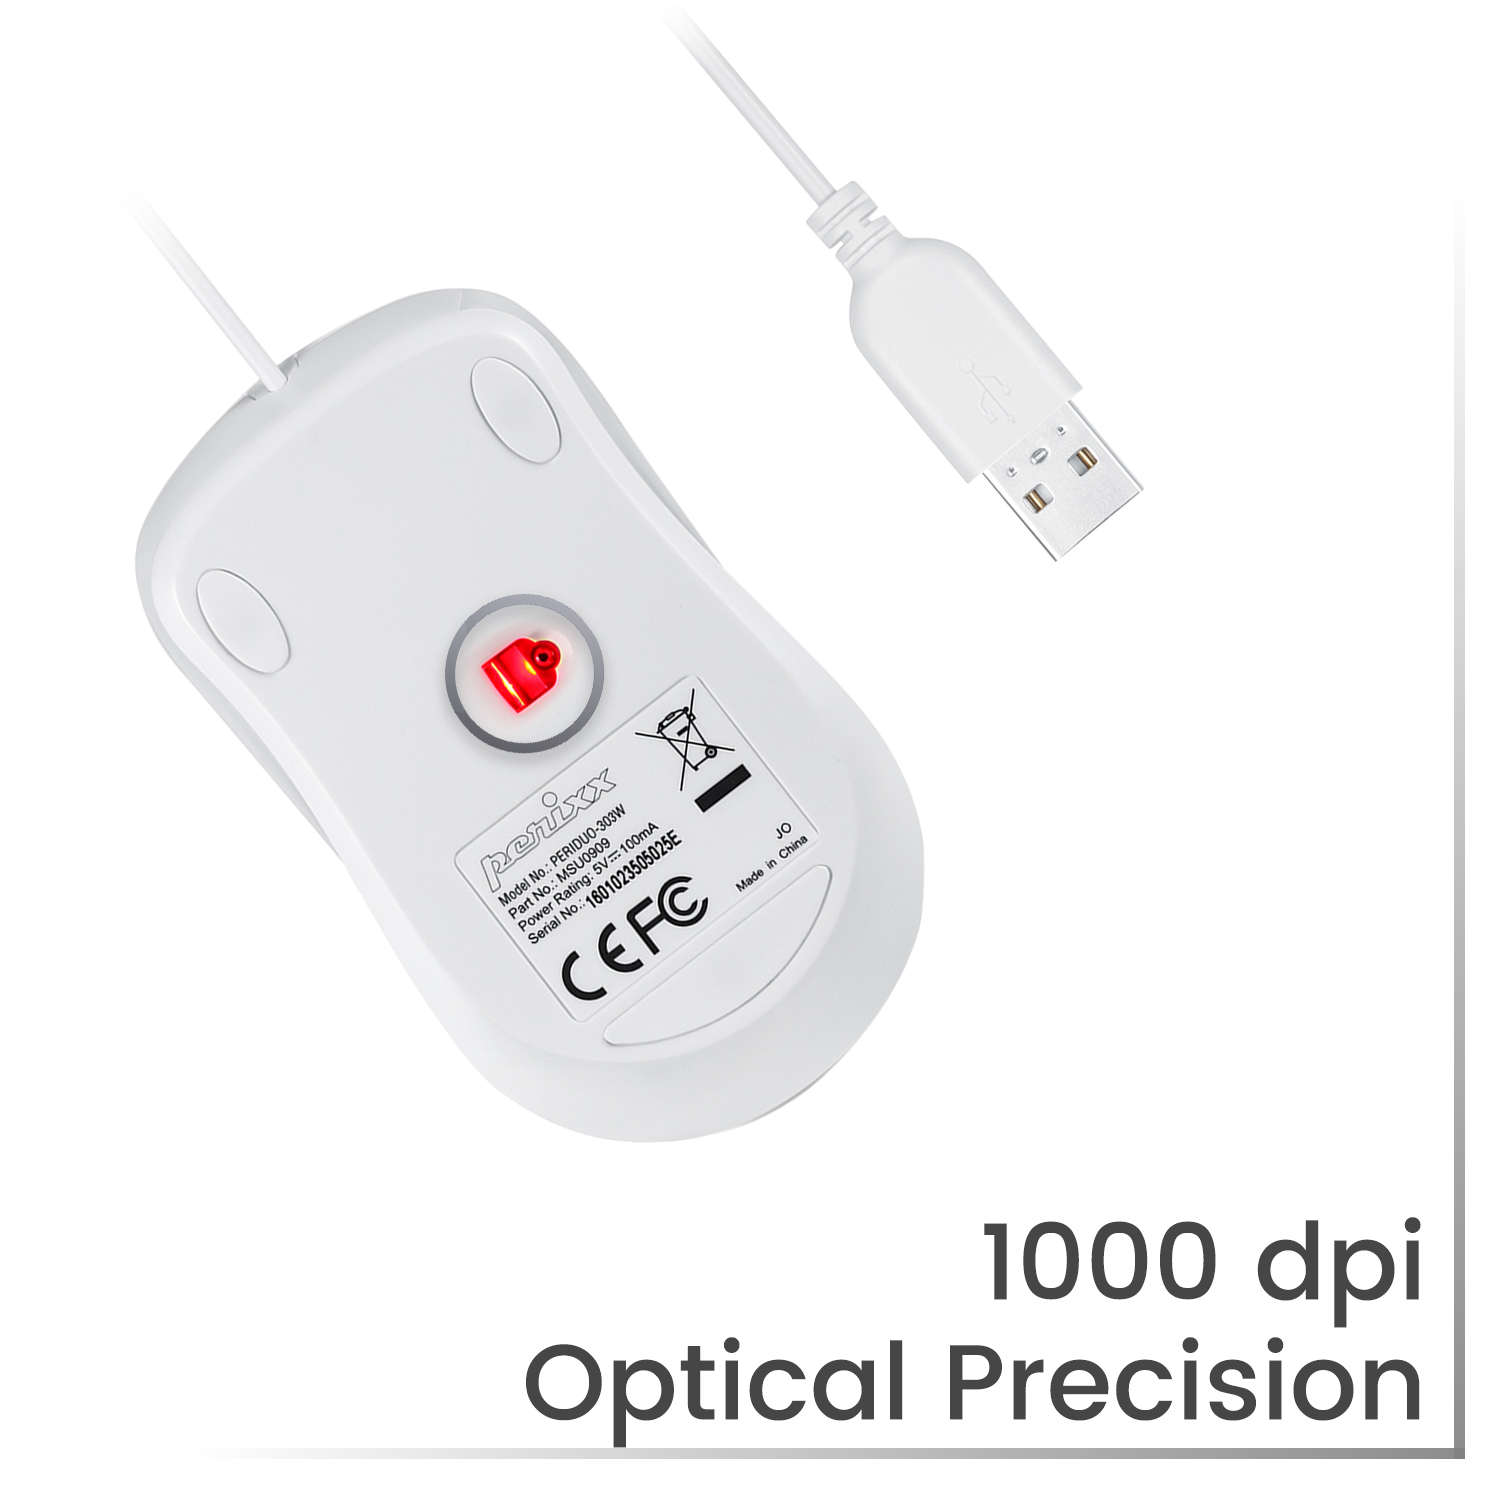 Optical Mouse with 1000 DPI